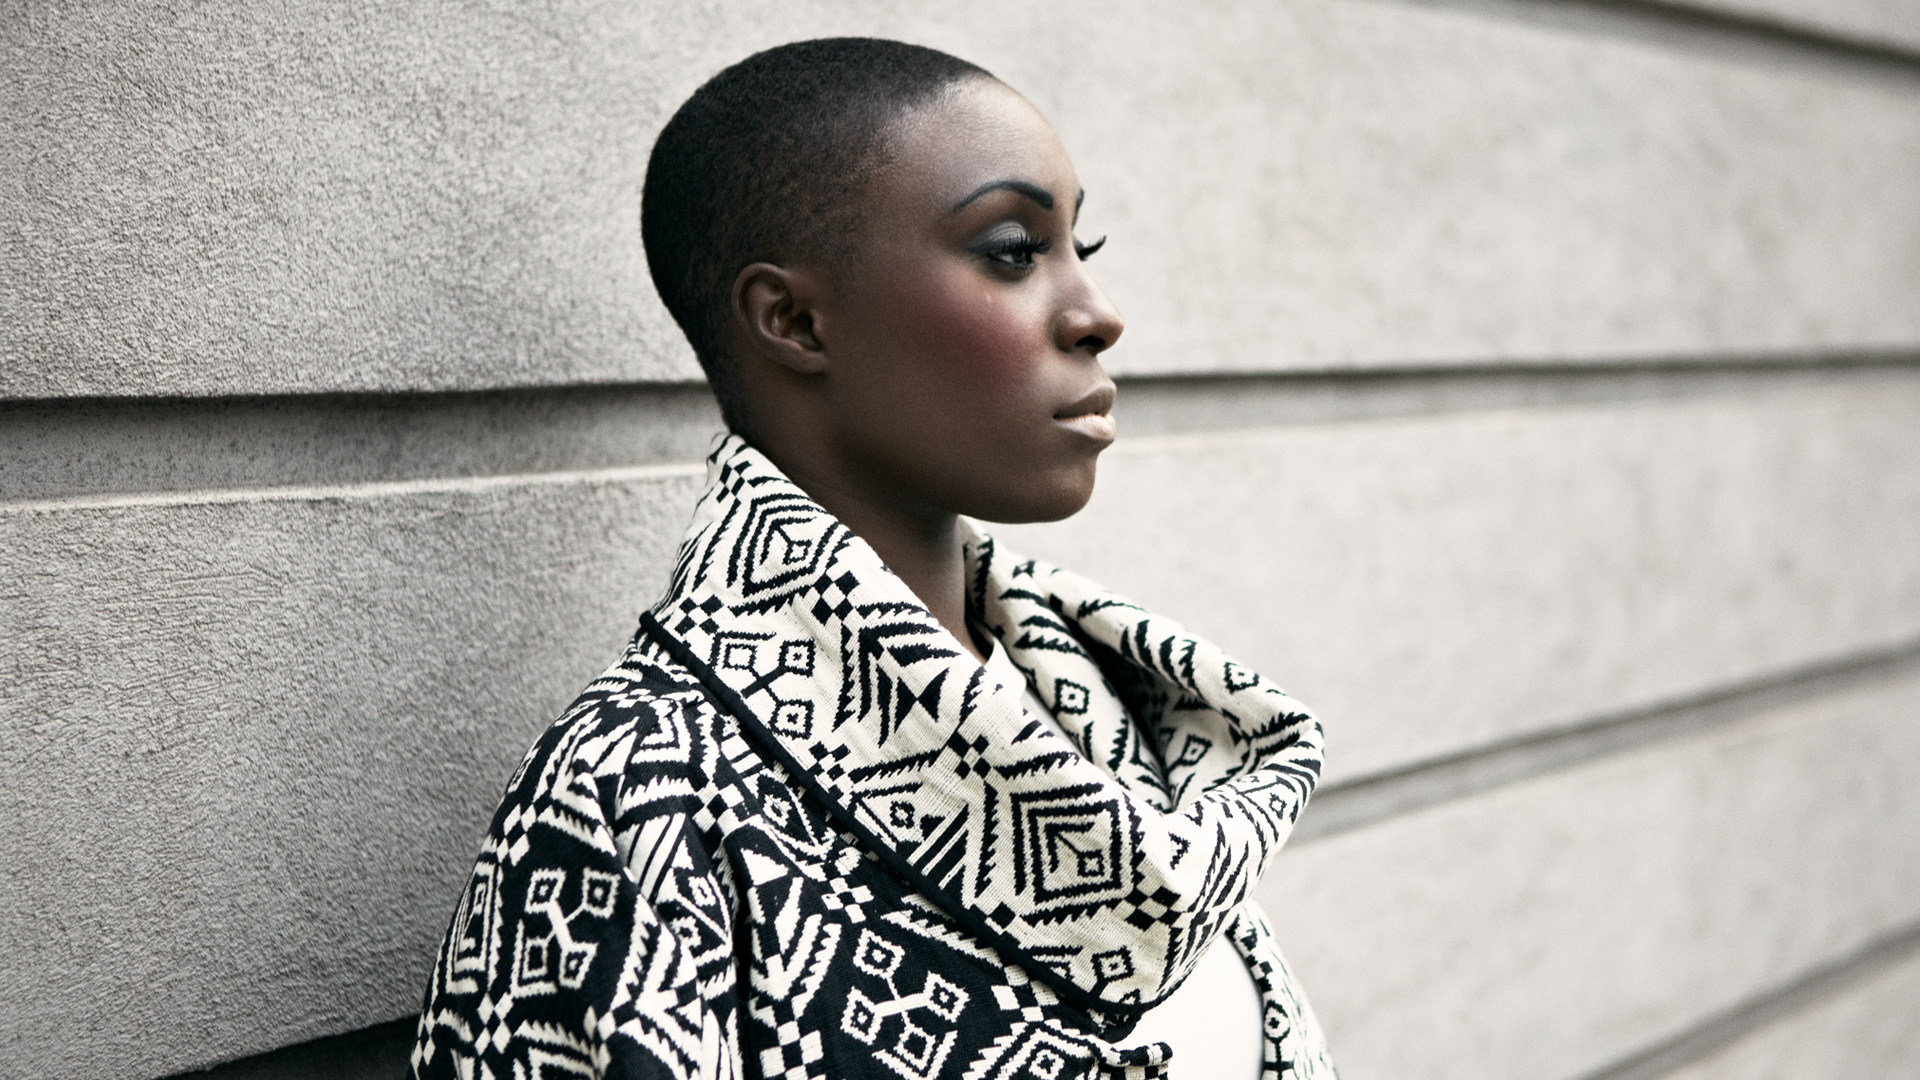 Is There Anybody Out There av Laura Mvula